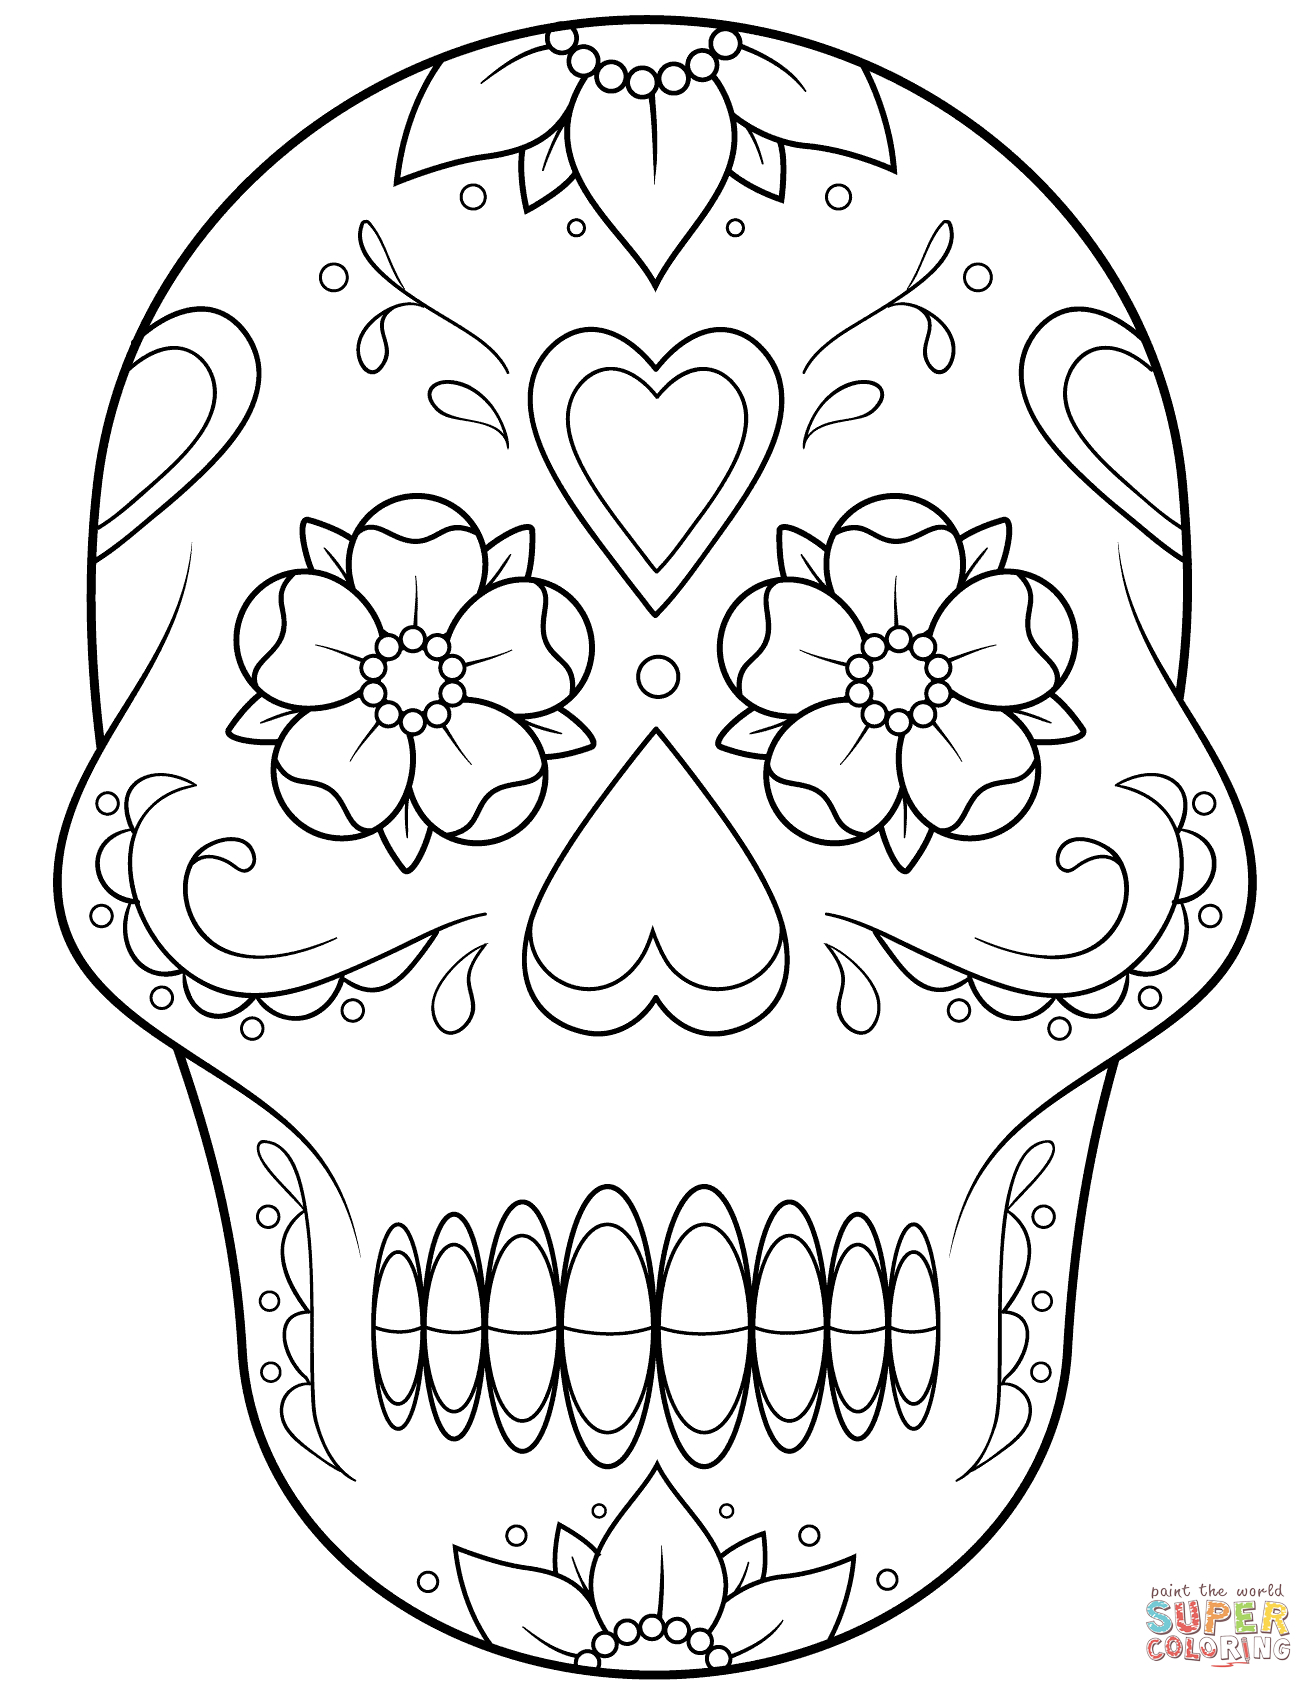 Sugar Skull With Flowers And Hearts Coloring Page | Free Printable - Free Printable Sugar Skull Coloring Pages